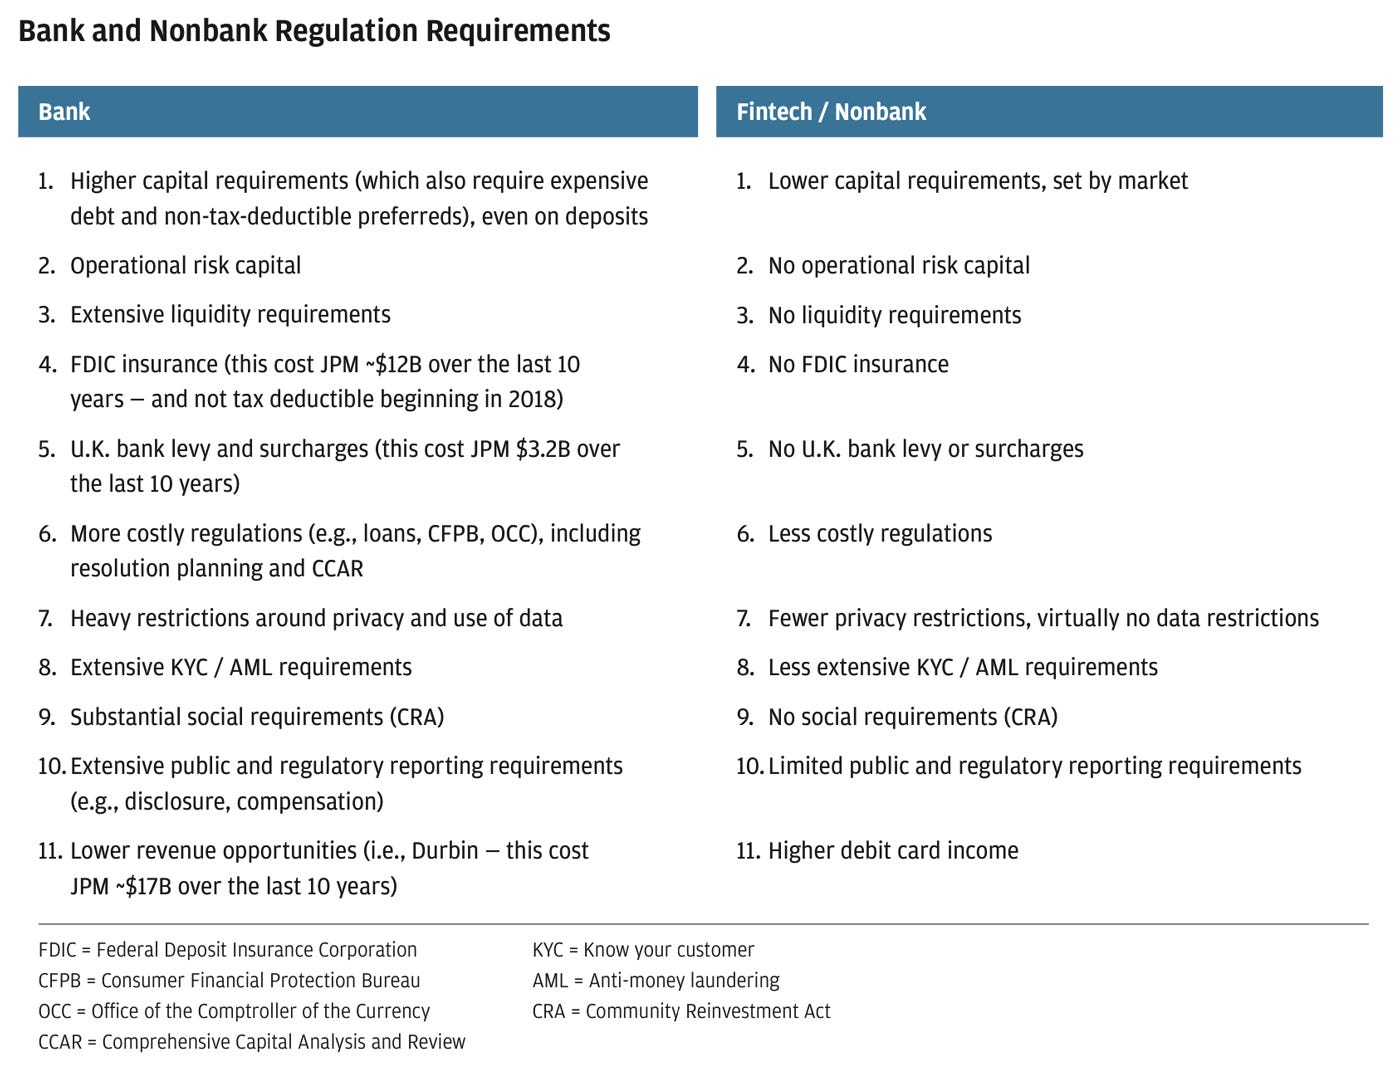 Chart showing current bank and nonbank regulation requirements split by Bank and Fintech/Nonbank